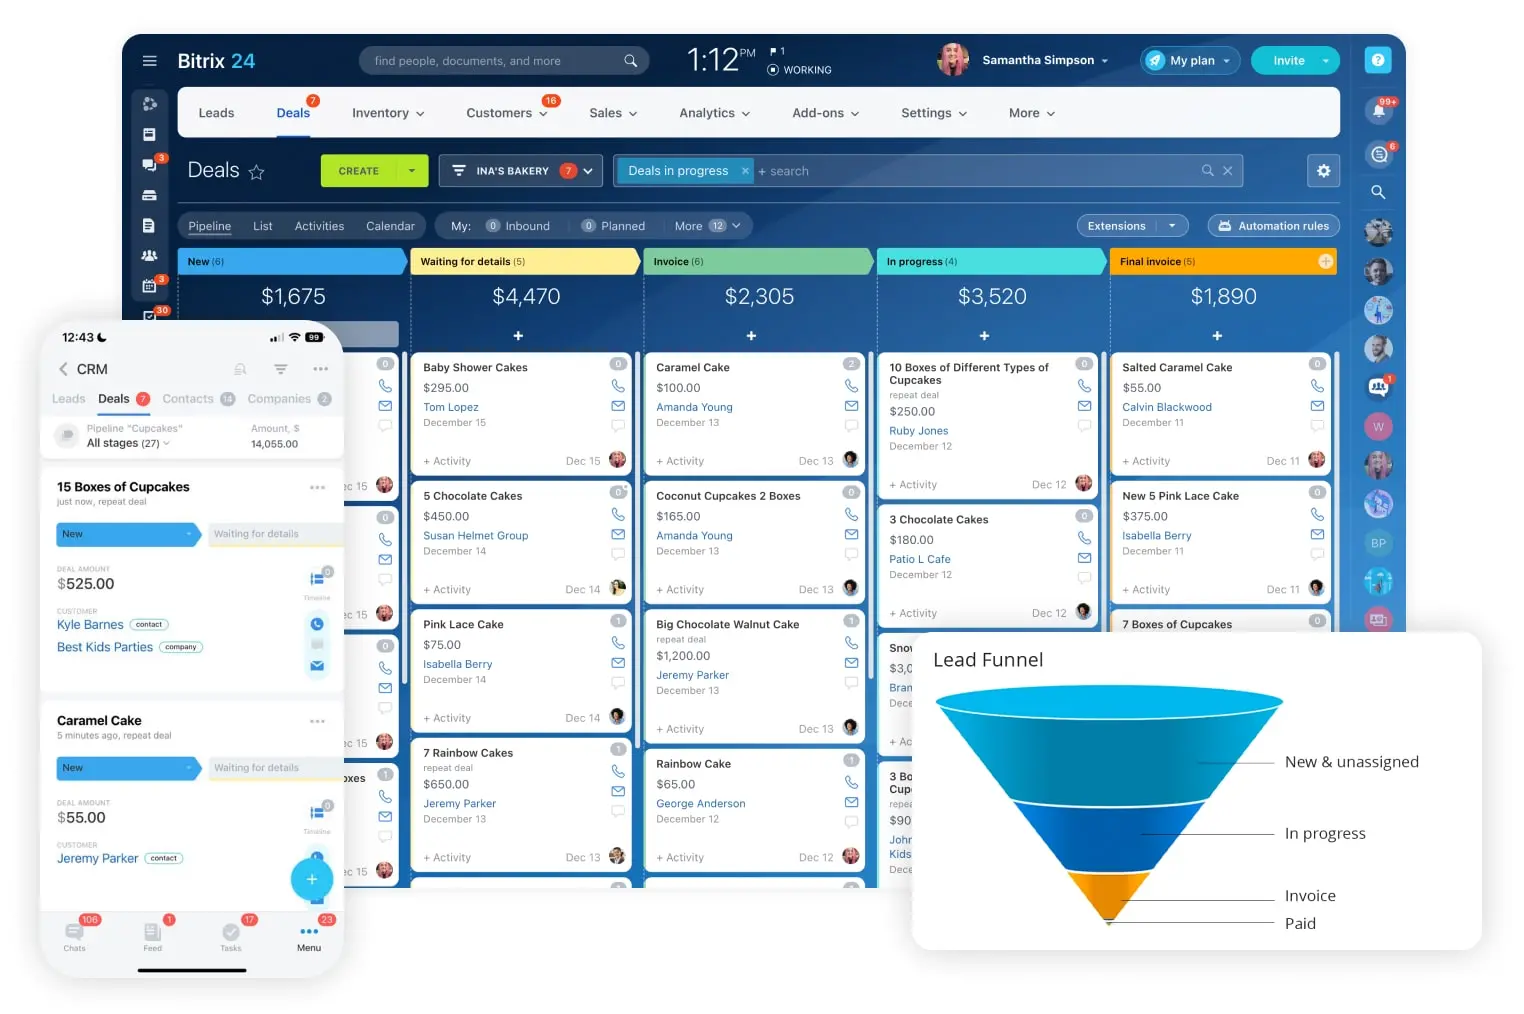 Get powerful CRM for free from Bitrix24. Unlimited CRM users + 35 sales tools on board